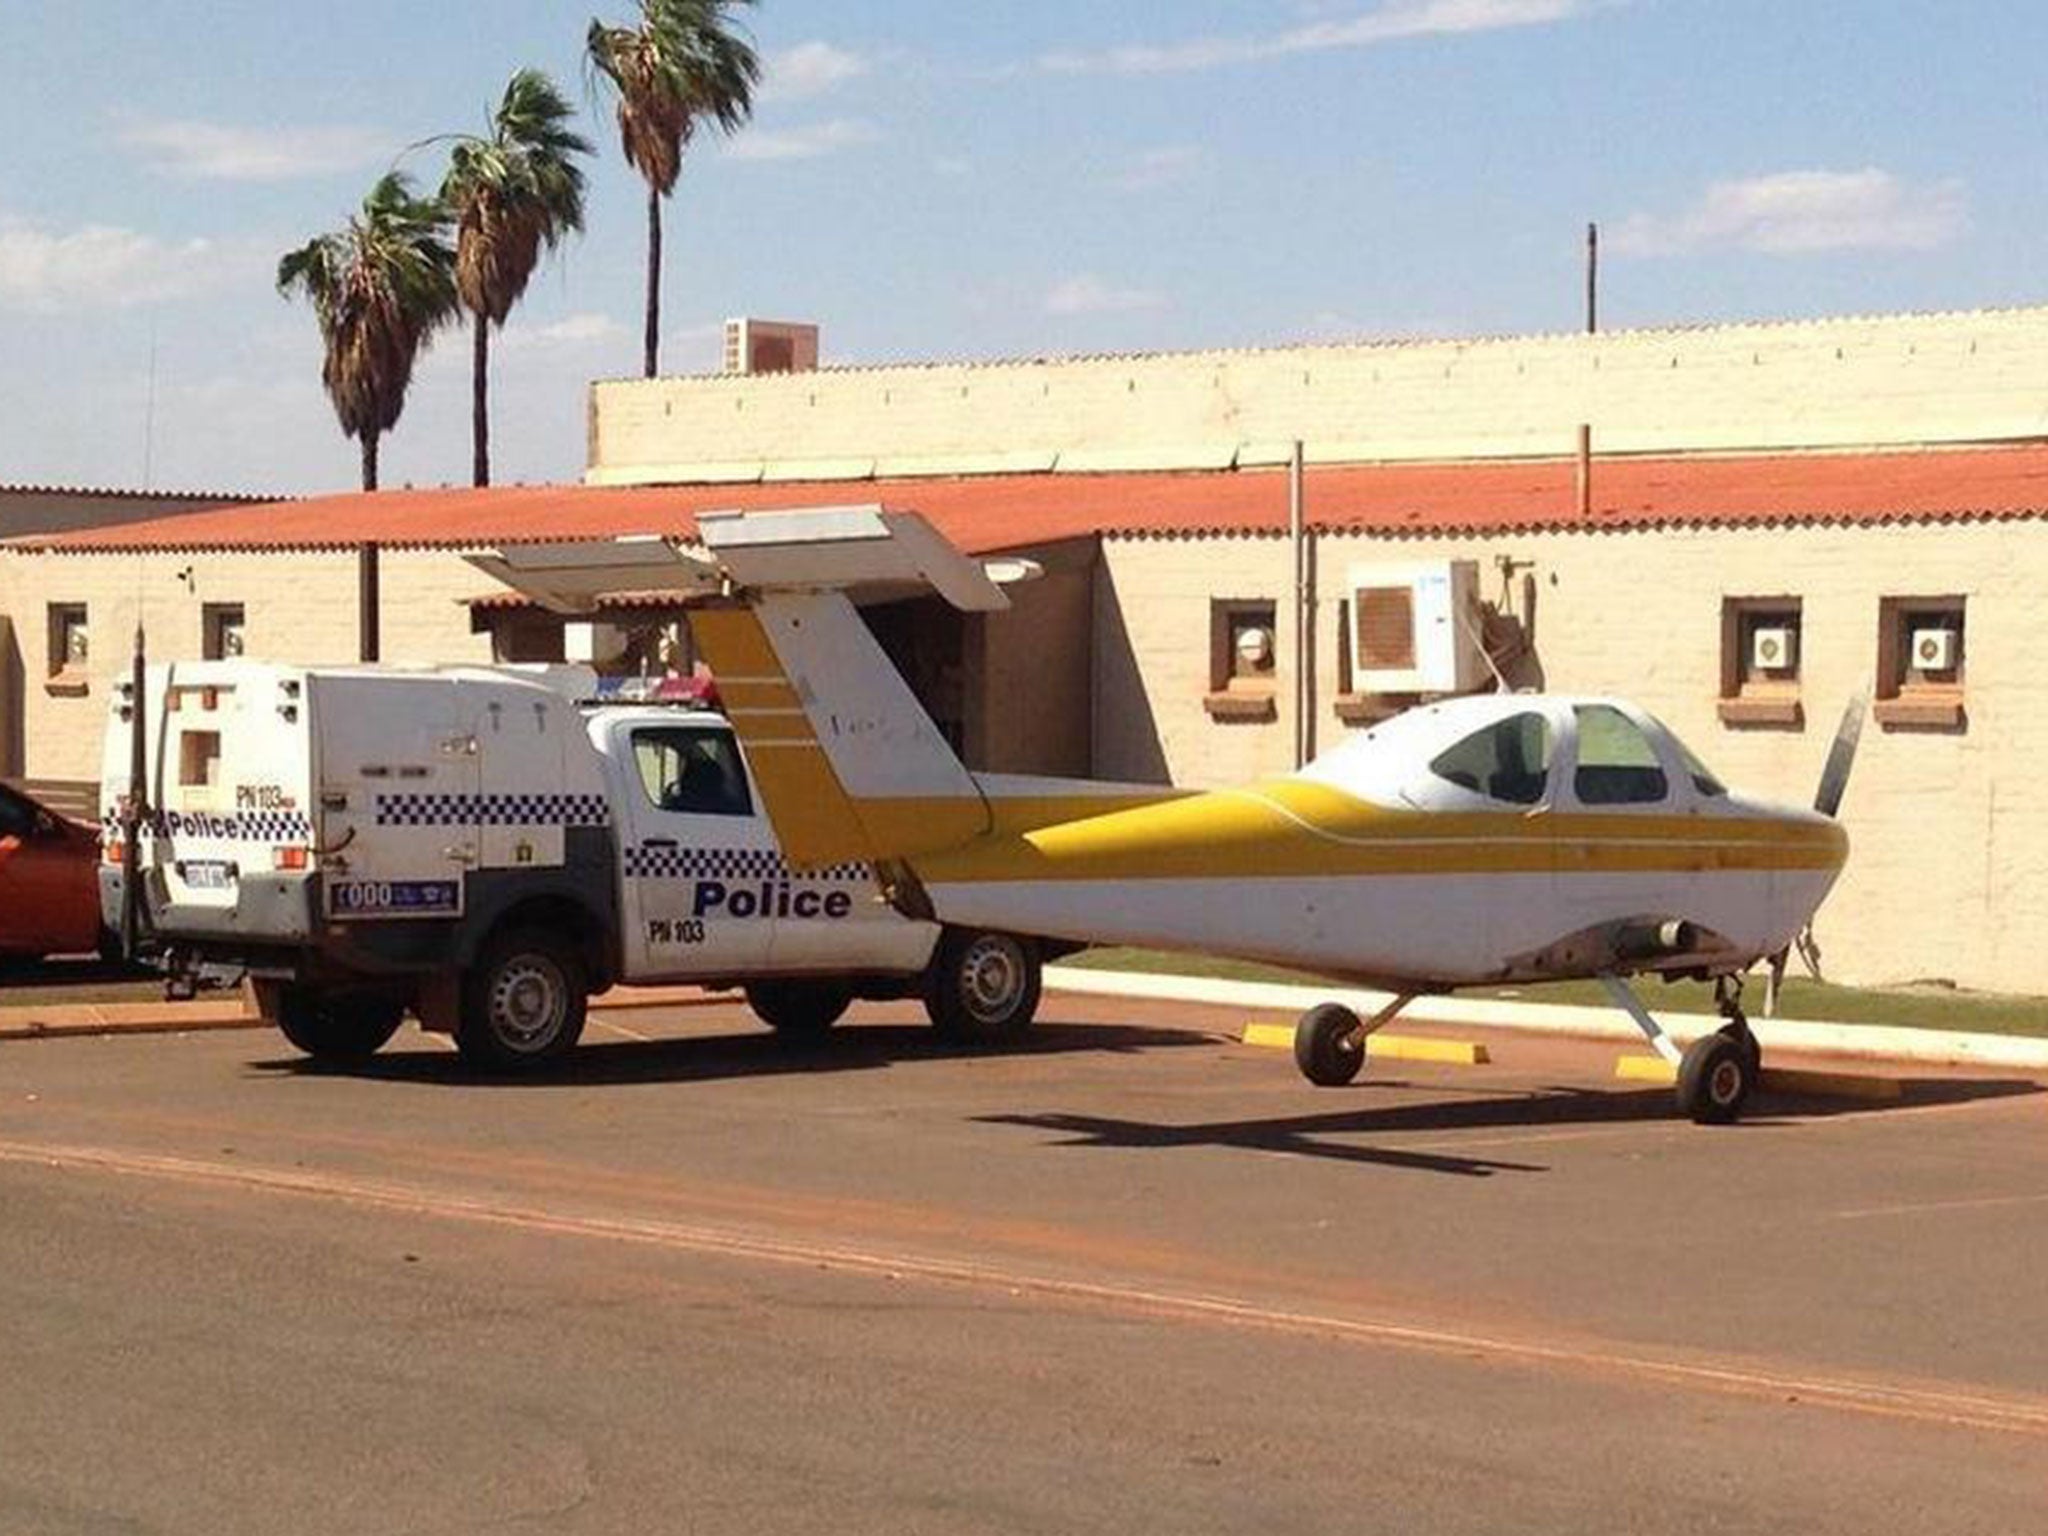 The plane's owner went in the pub for a drink after parking outside